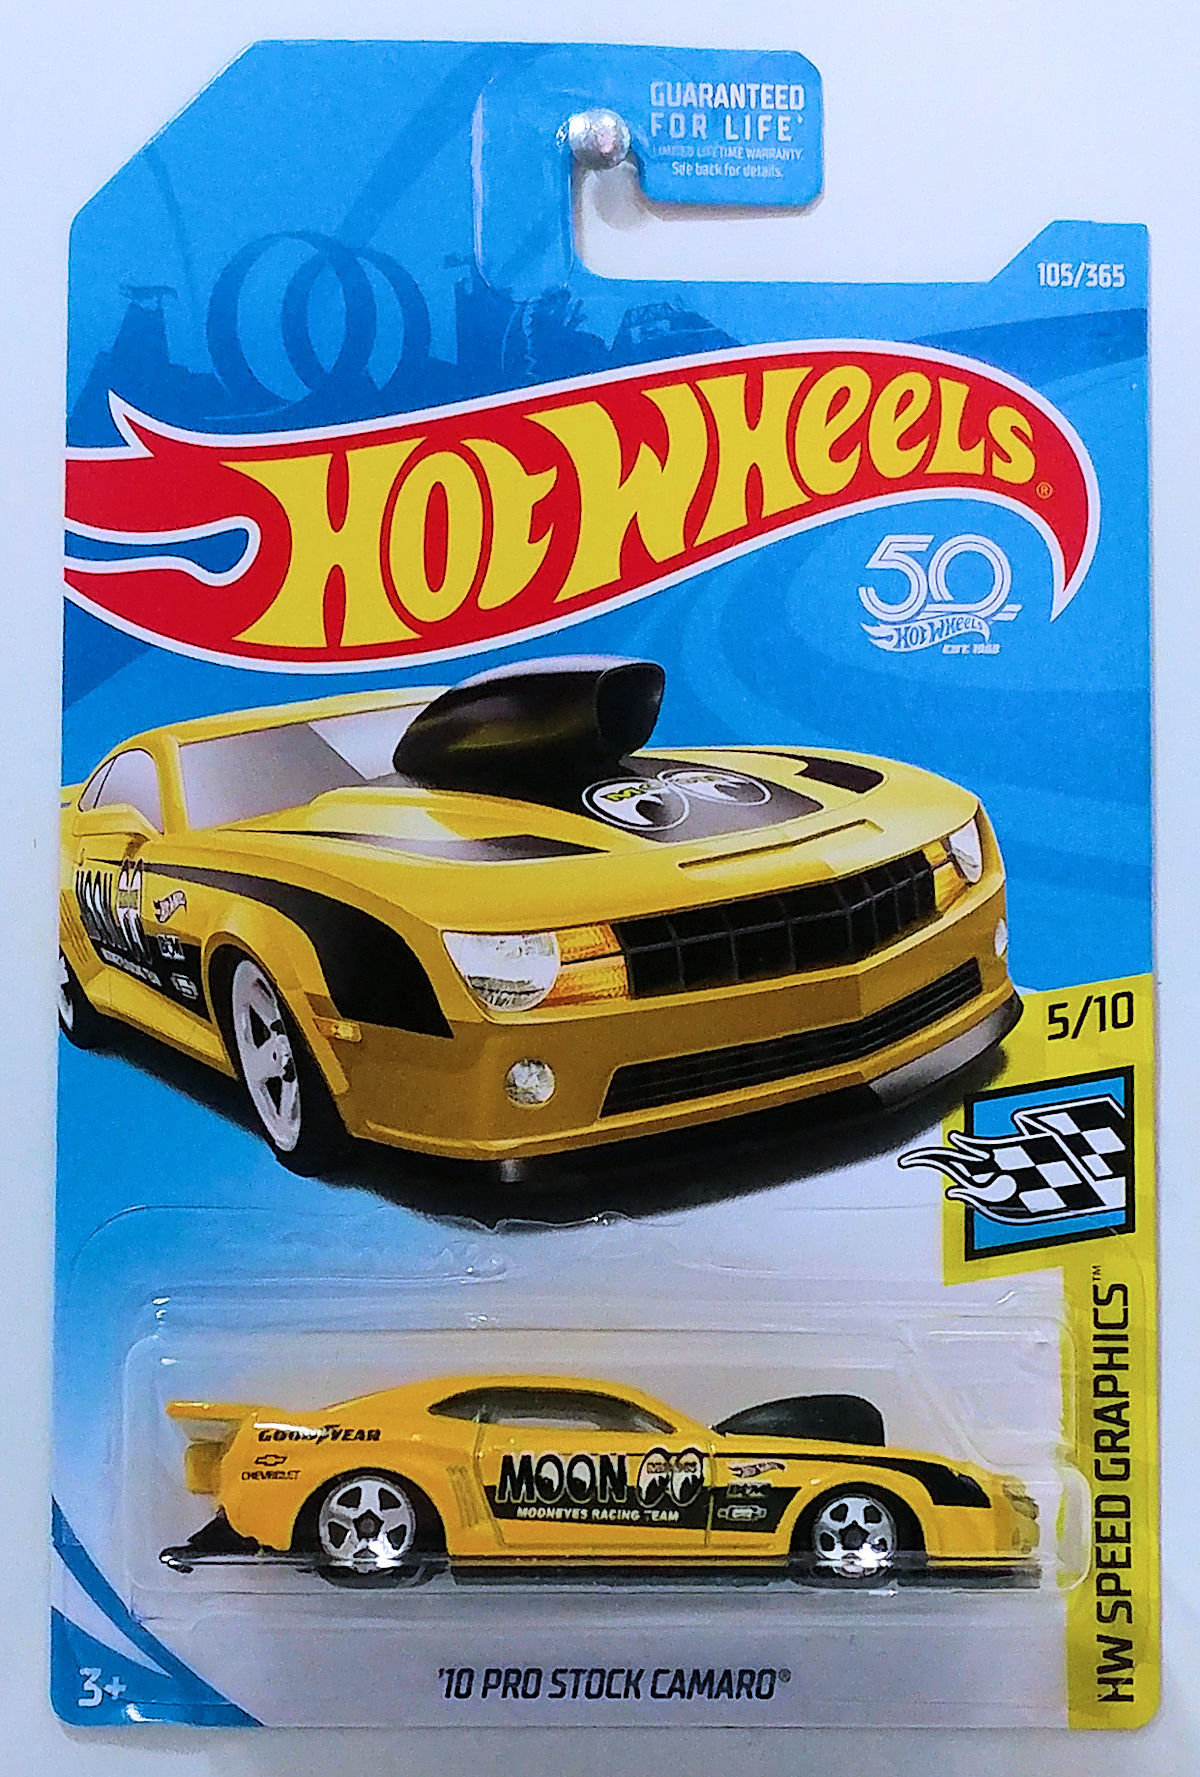 Hot Wheels 10 Pro Stock Camaro Mooneyes 2017 Speed Graphics VHTF Ship in 24 HRS for sale online 